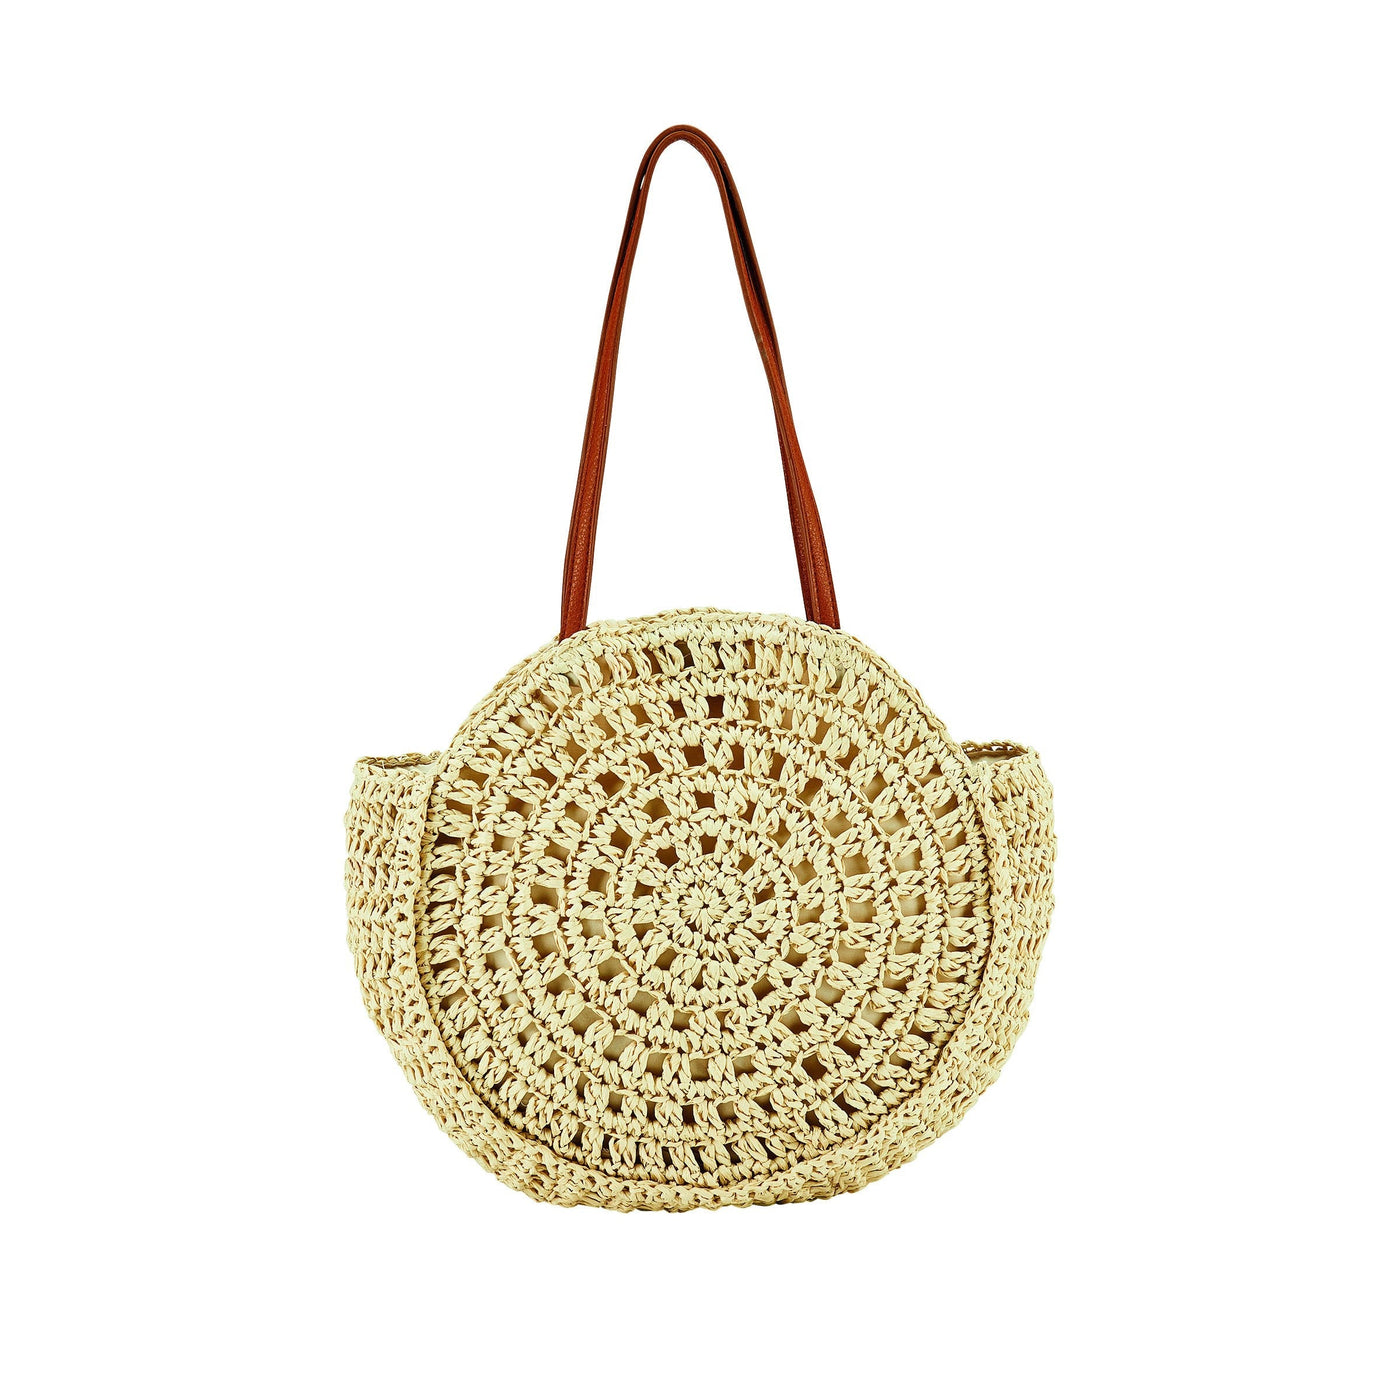 TOTE - Circular Woven Paper Tote With Faux Leather Handles  (BSB3711)